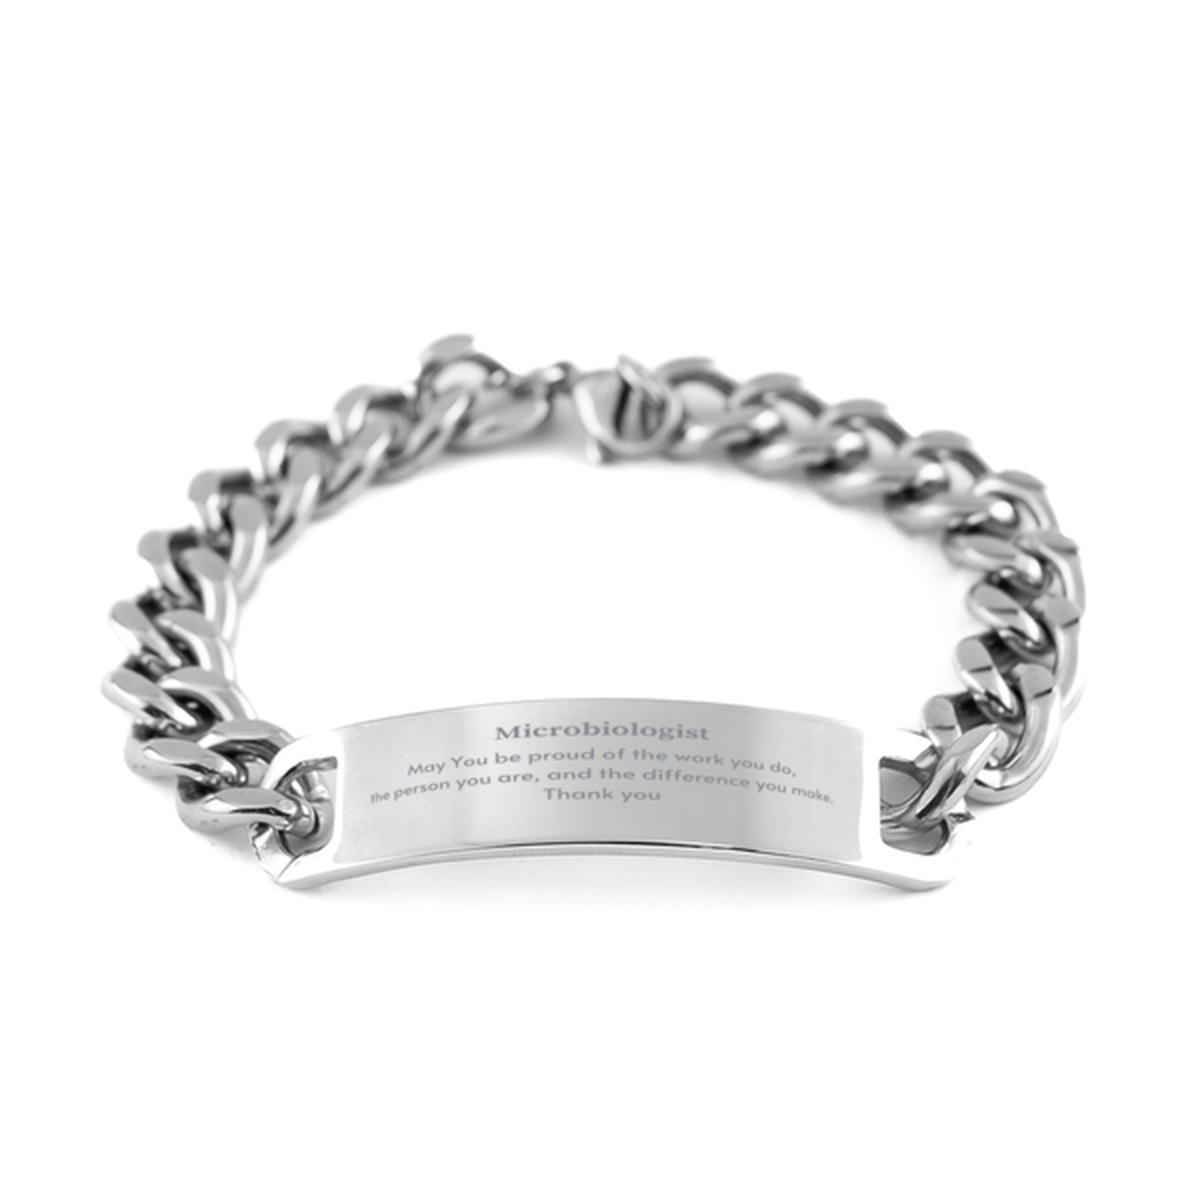 Heartwarming Cuban Chain Stainless Steel Bracelet Retirement Coworkers Gifts for Microbiologist, Microbiologist May You be proud of the work you do, the person you are Gifts for Boss Men Women Friends